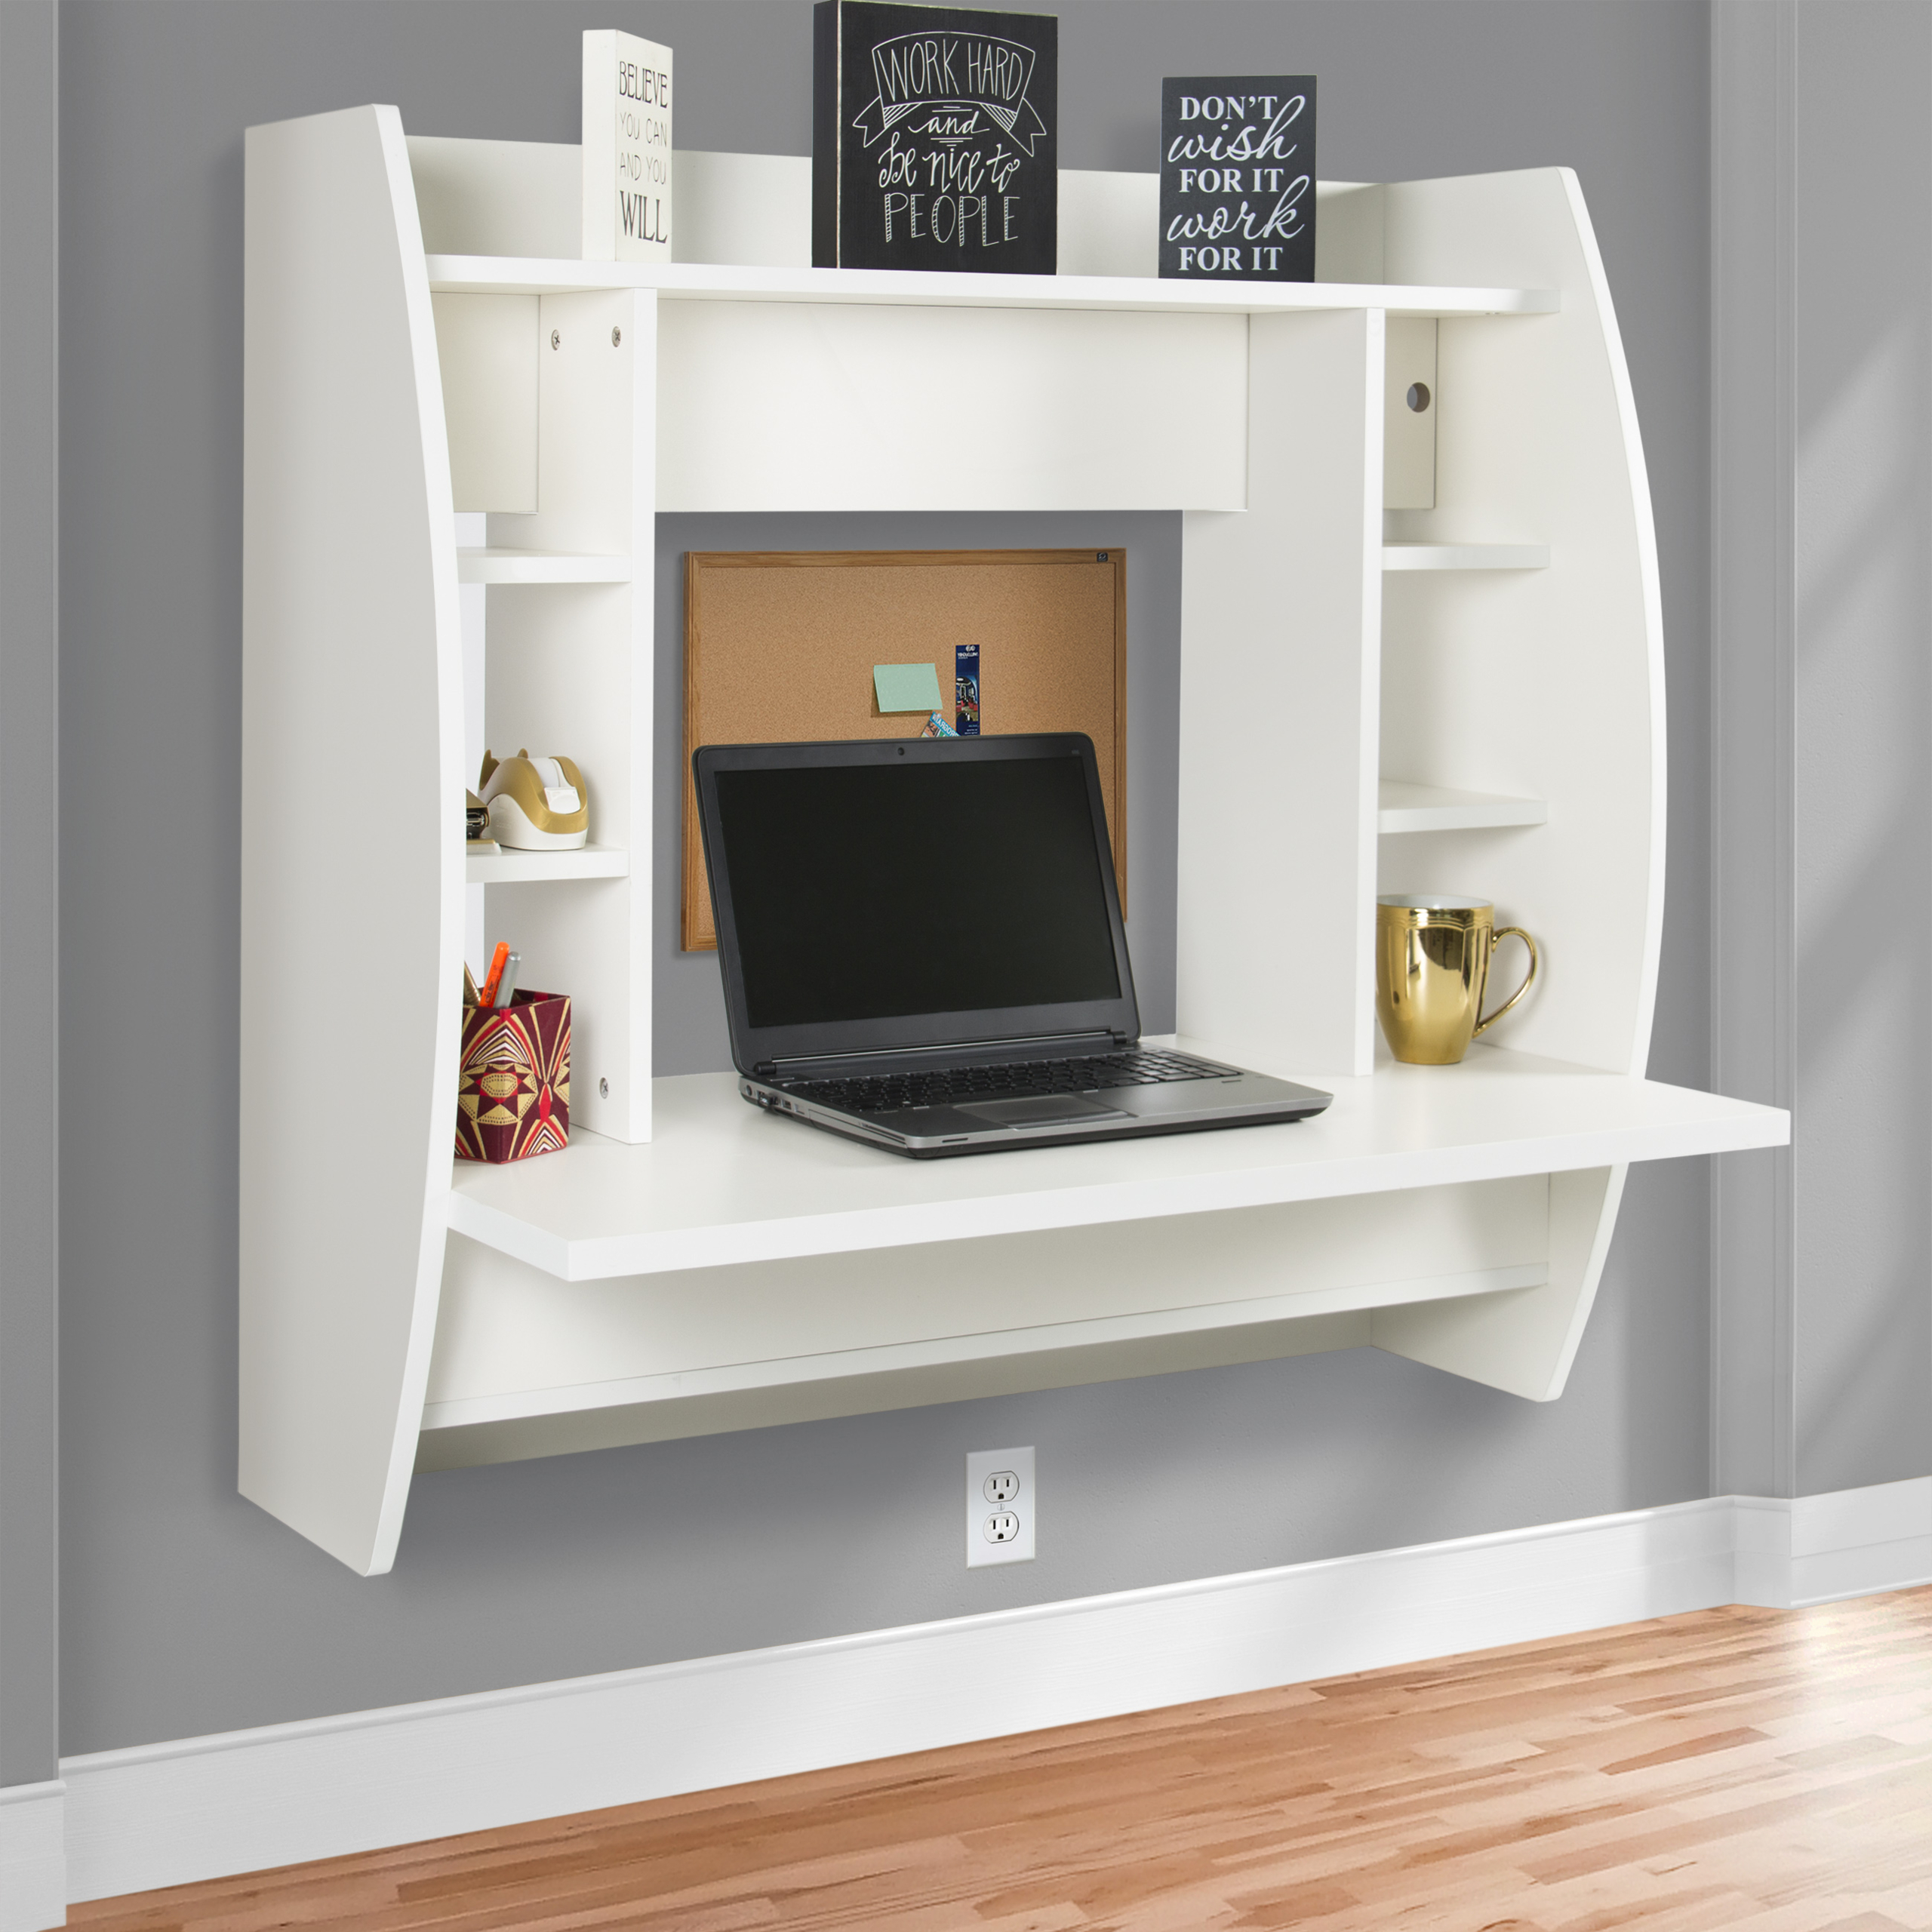 Wall Mounted Desk Wall Mounted Laptop Computer Desk w/Storage Compartments Home 